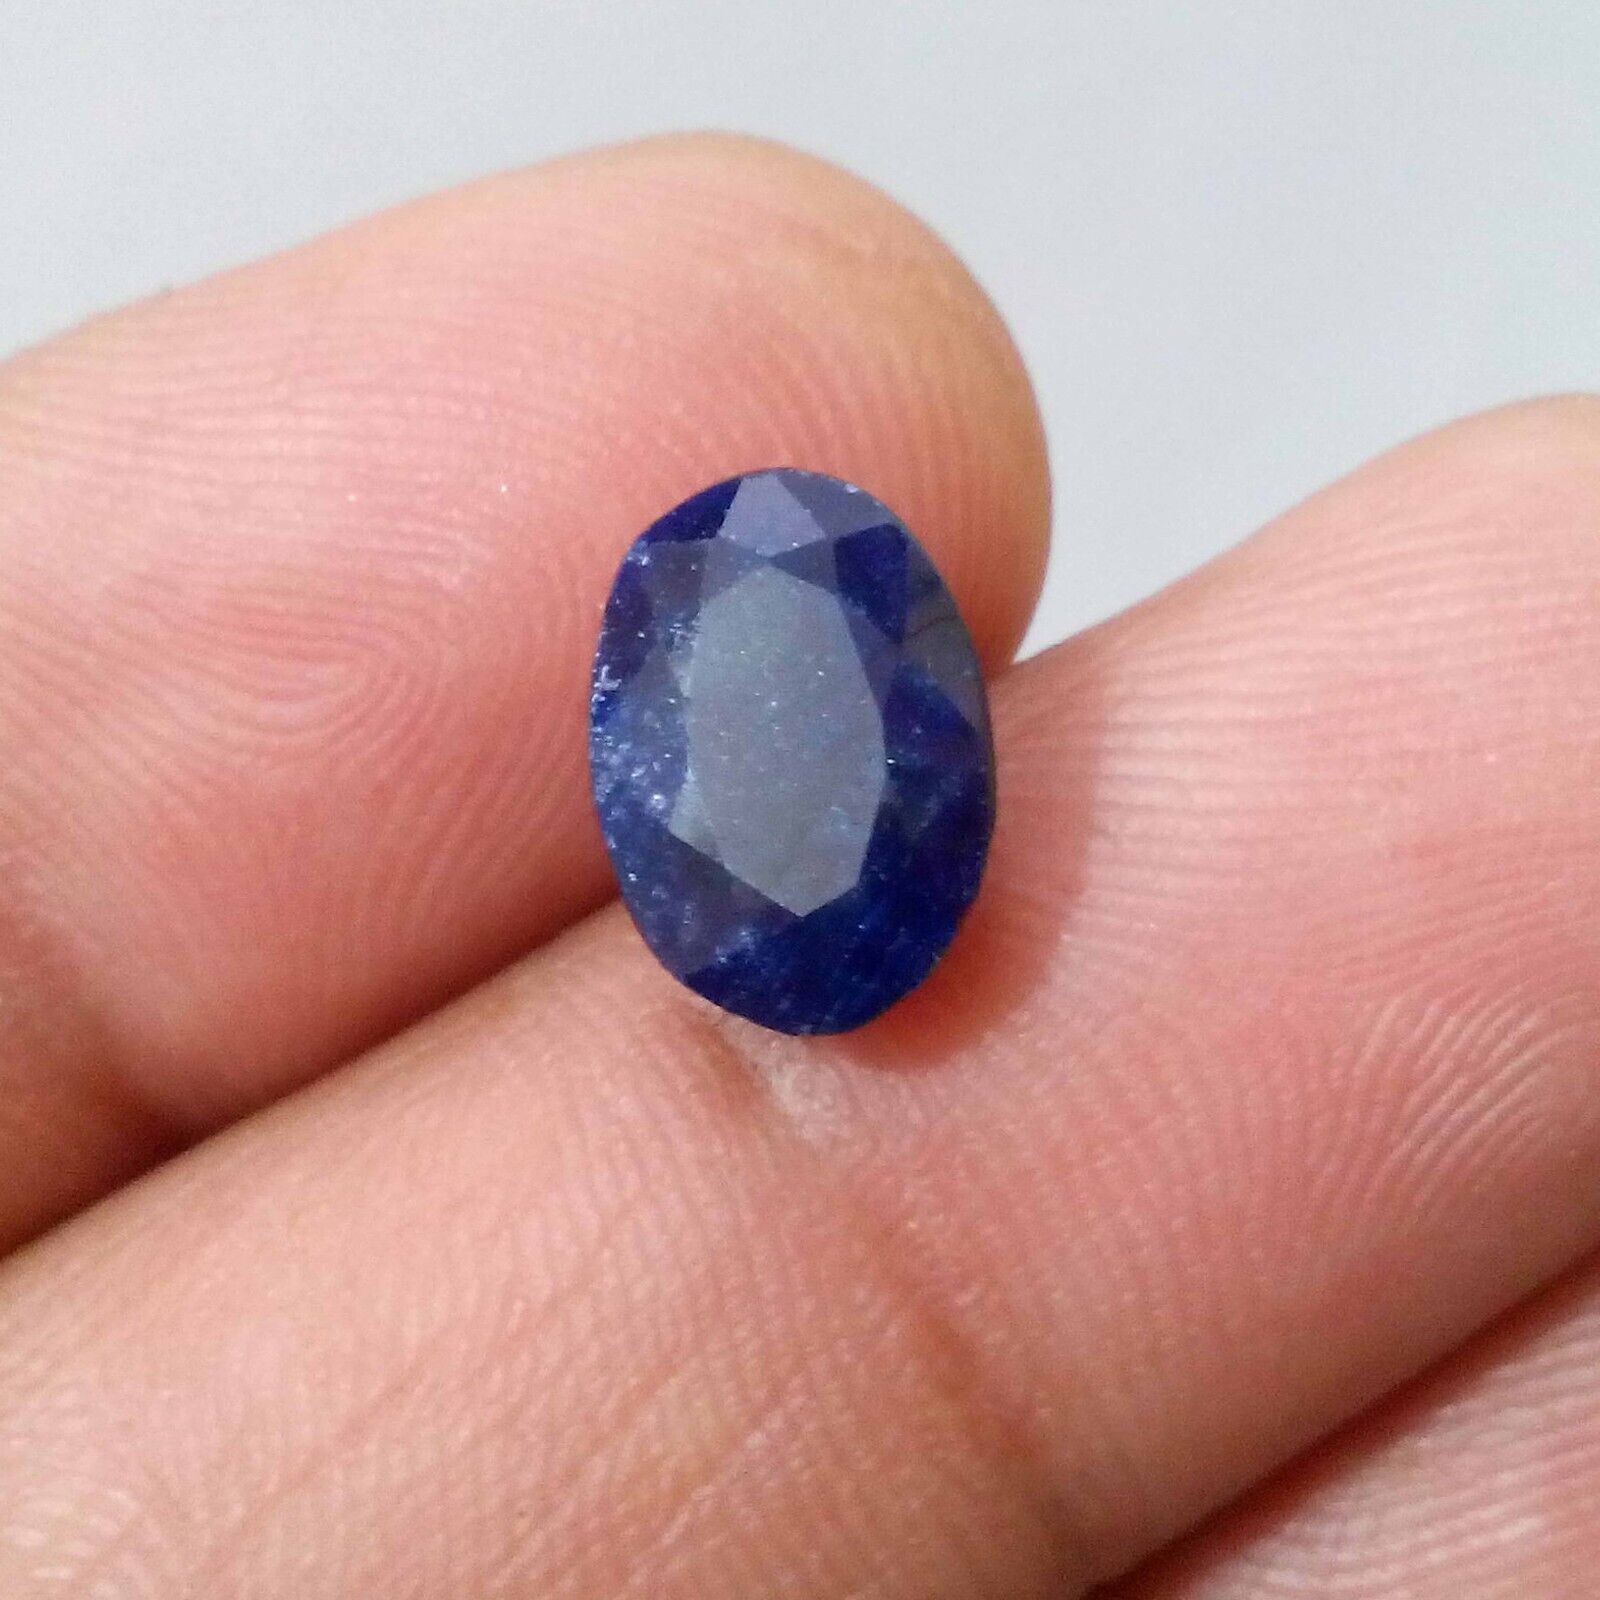 100% Natural Fabulous Blue Sapphire Faceted Oval Shape 5.85 Crt Loose Gemstone